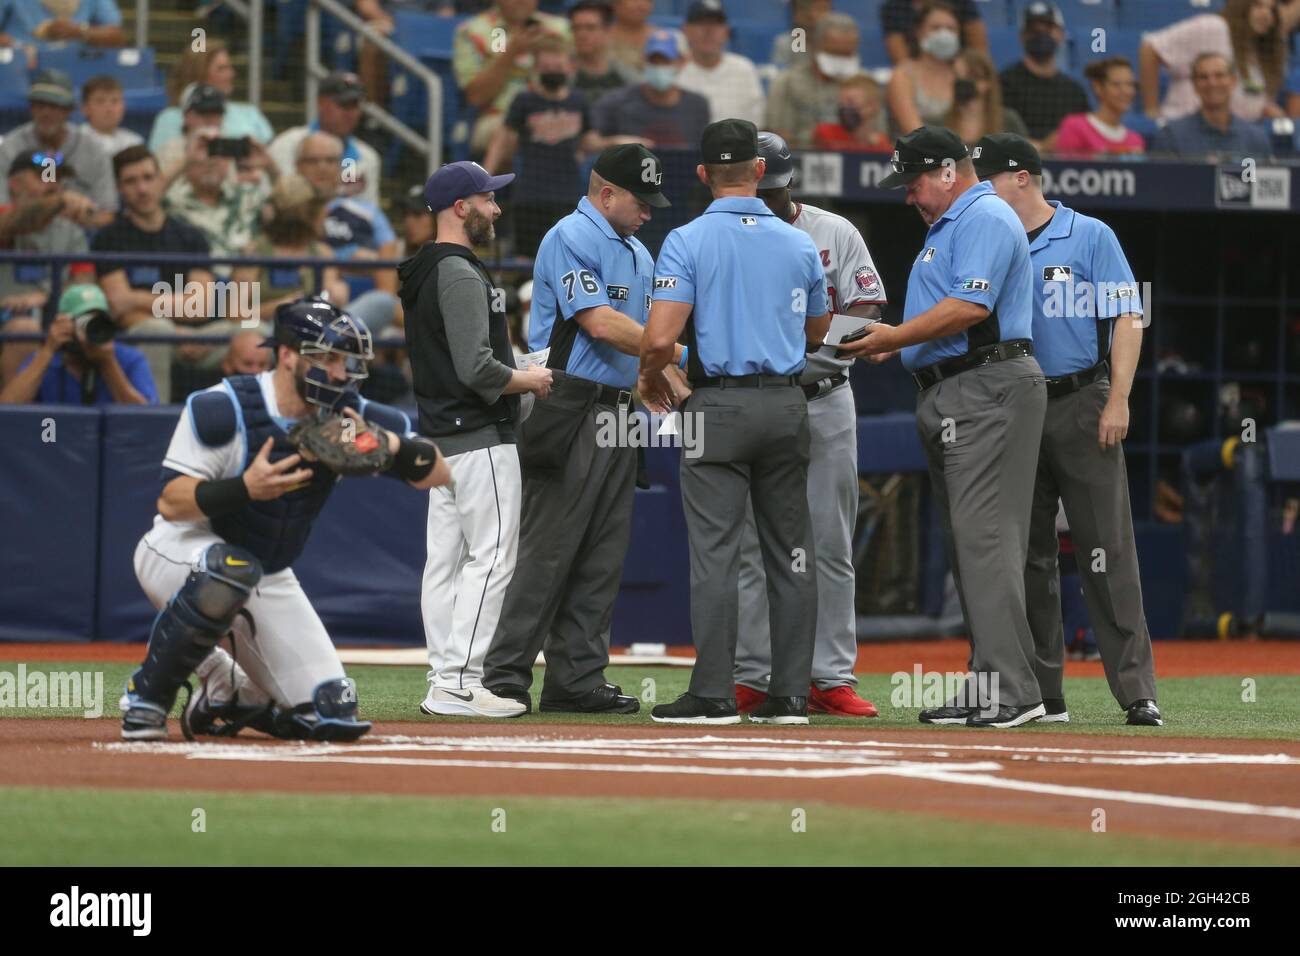 St. Petersburg, FL. USA;  The umpires and assistant coaches meet at the mound prior to a major league baseball game between the Tampa Bay Rays and the Stock Photo